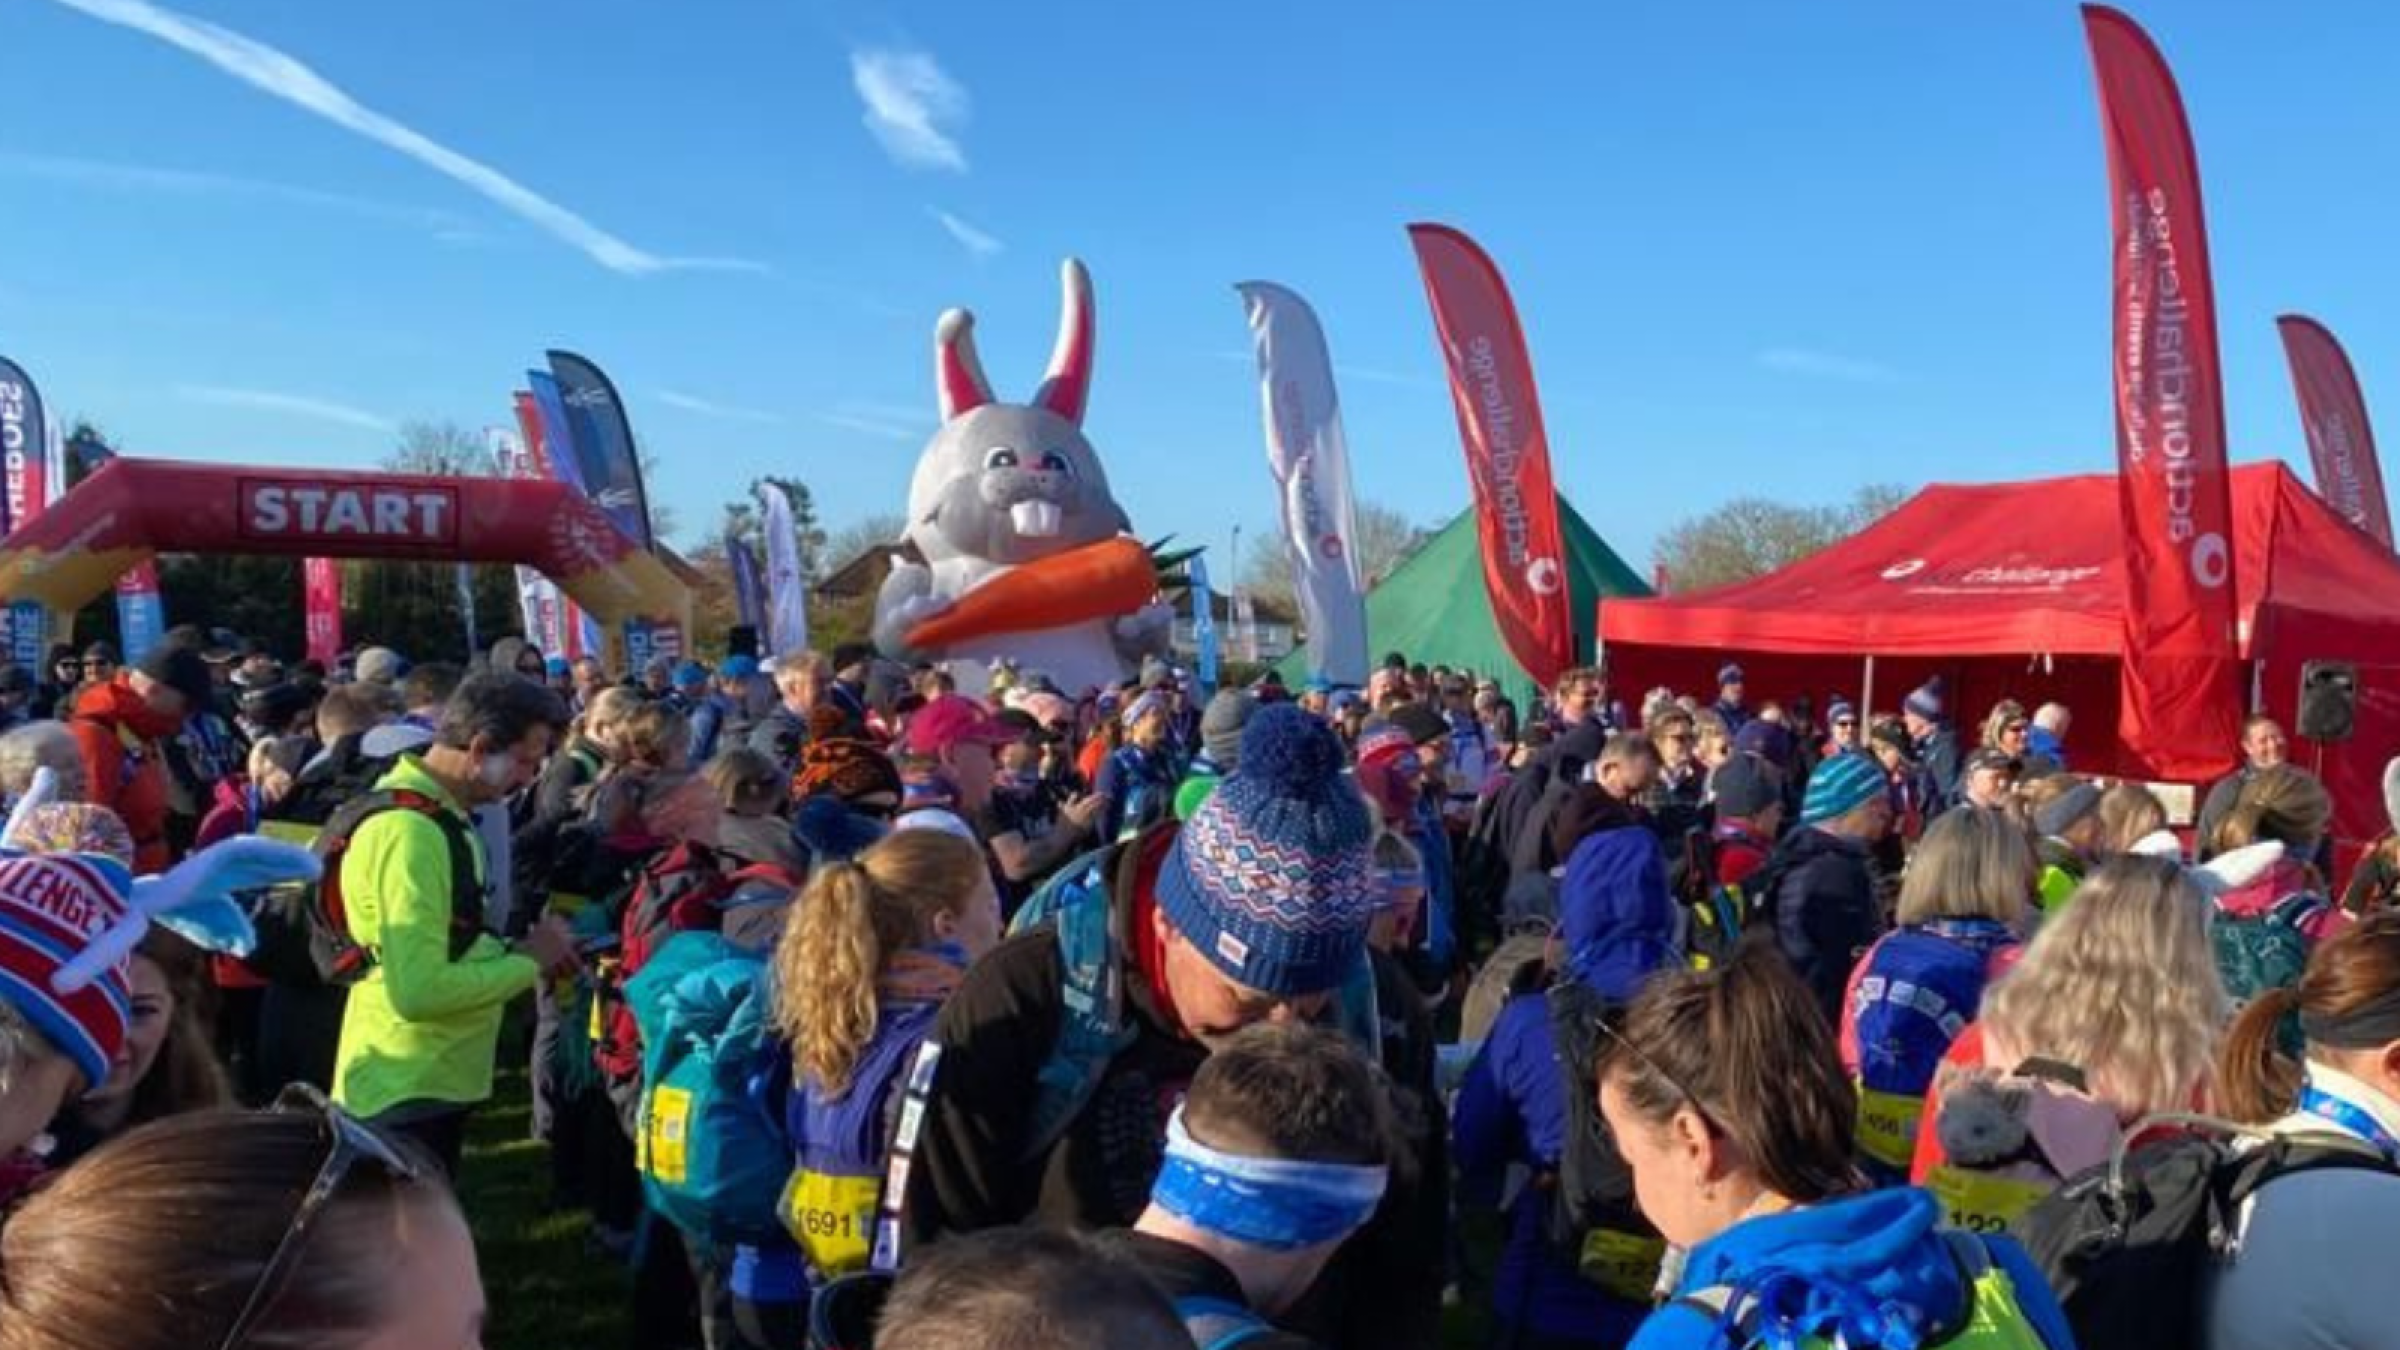 A crowd of people at the start line with a giant bunny in the background